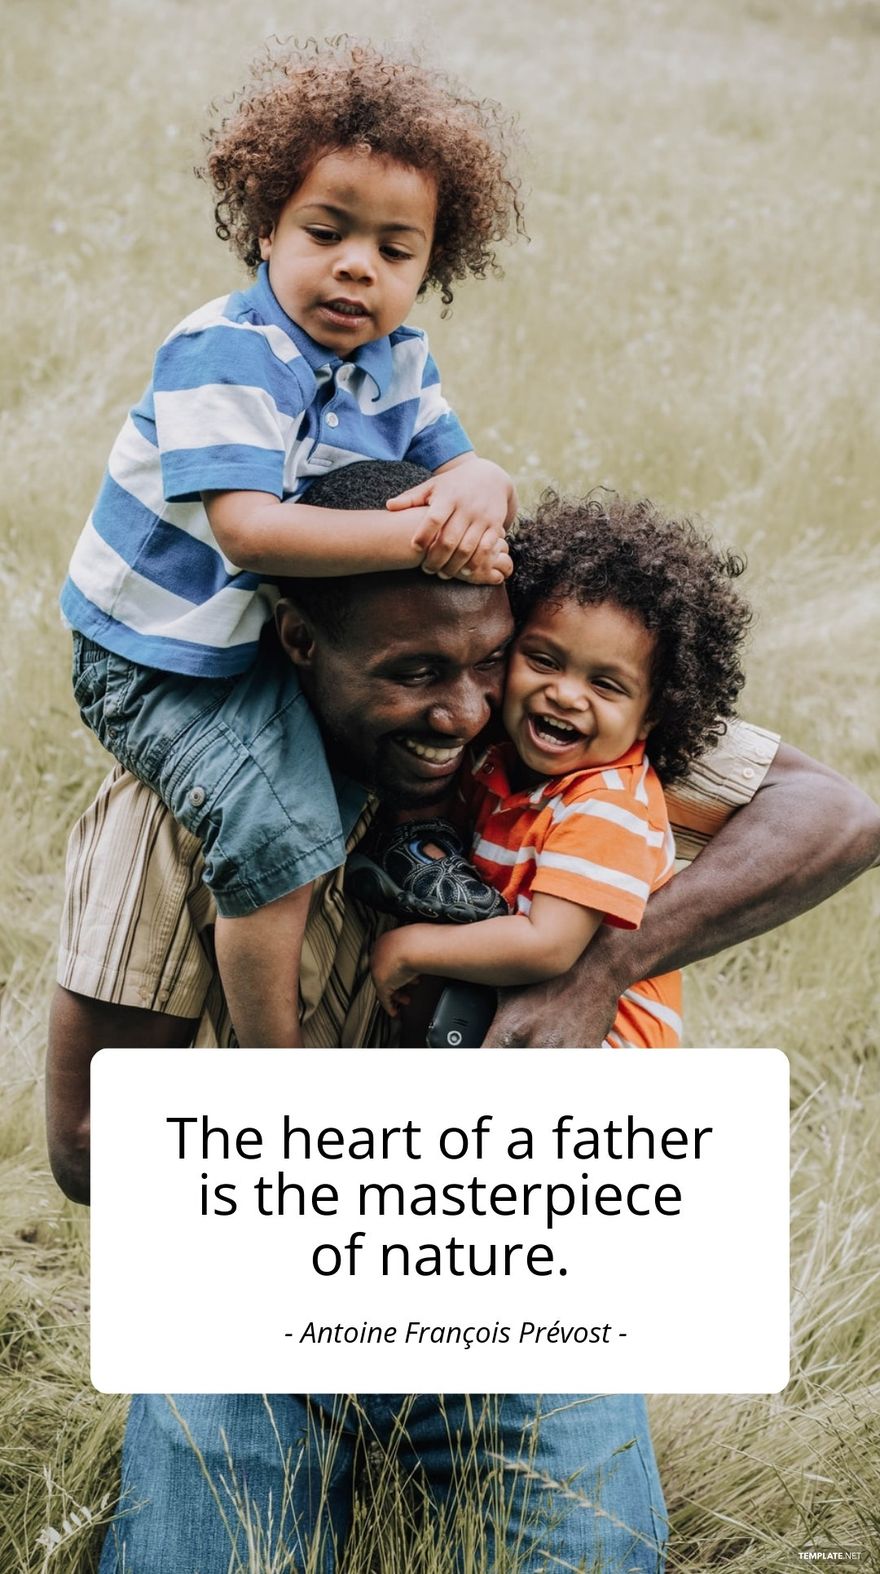 Antoine François Prévost - The heart of a father is the masterpiece of nature. in JPG